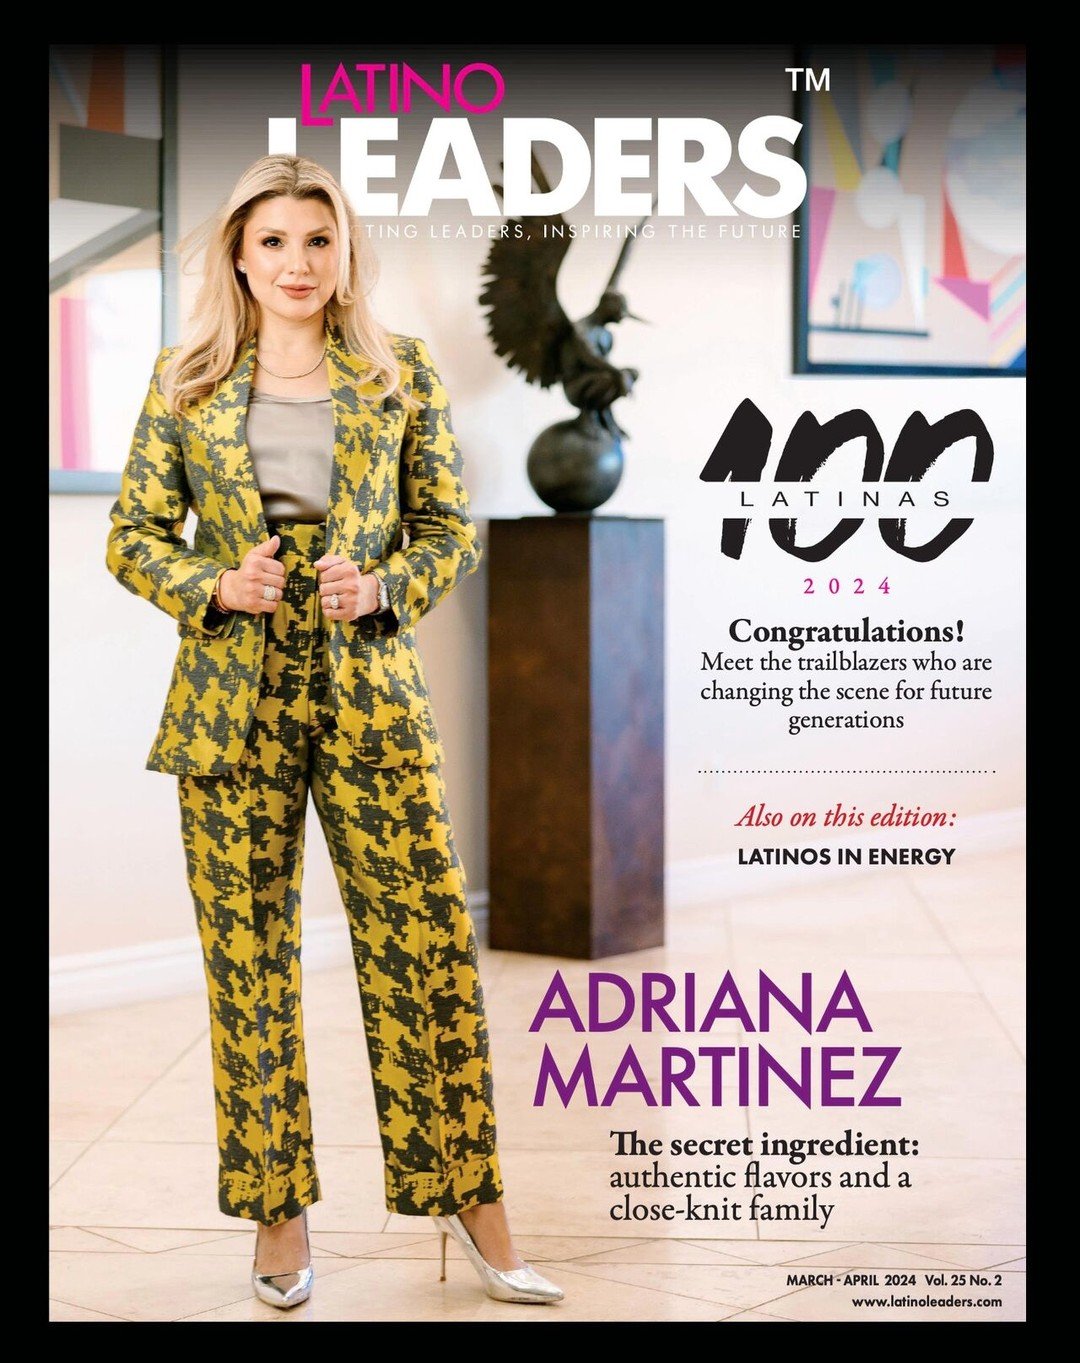 Exciting Announcement!
🎉 Presenting our 100 Latinas 2024 Edition - Available Now! 🎉

Dive into the latest edition of our esteemed publication, featuring none other than Adriana Martinez, the exceptional President and CEO at Casa Martinez Food Compa